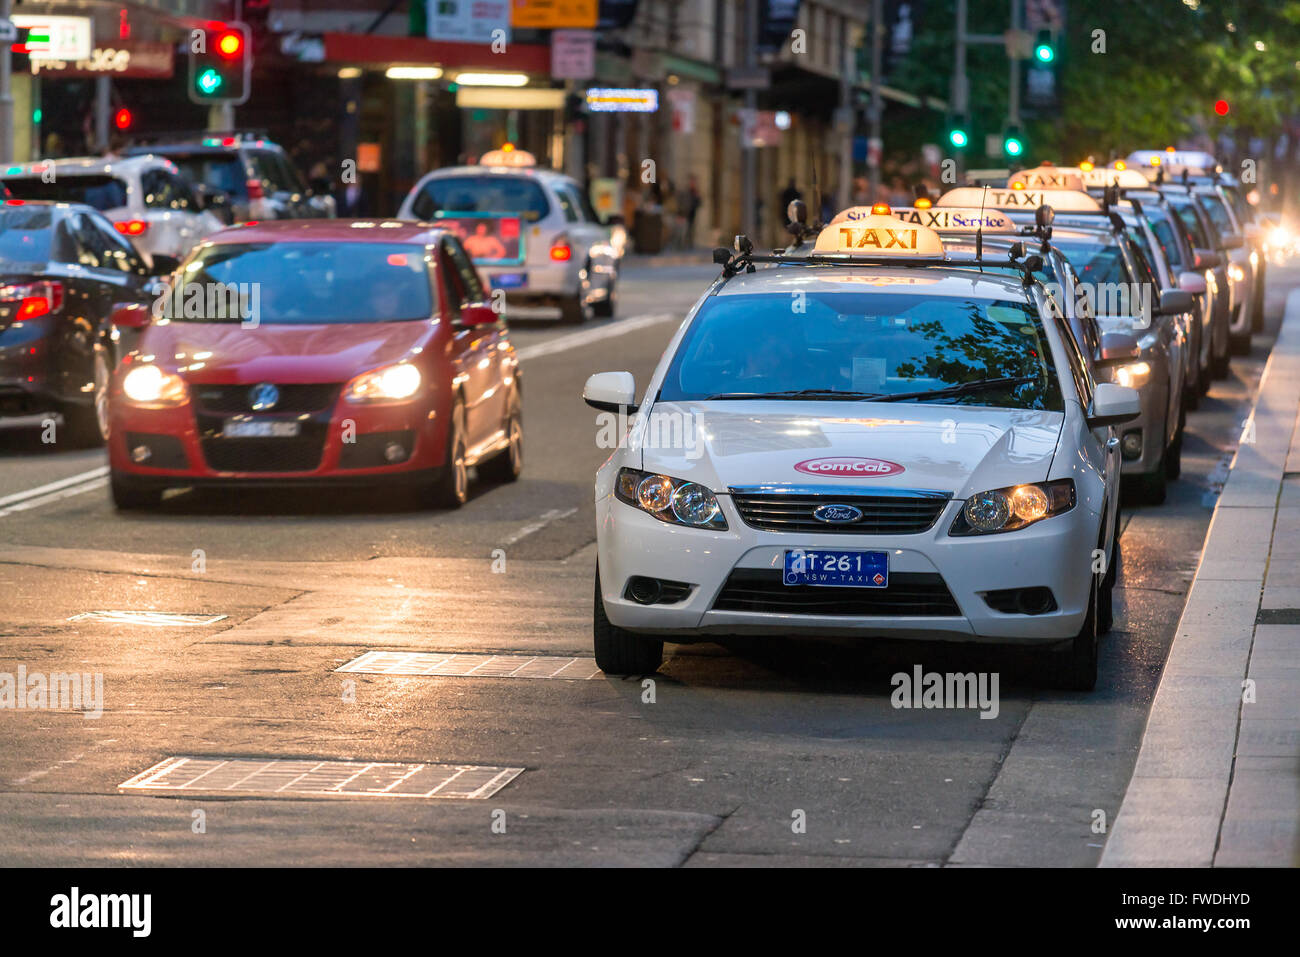 Sydney, Australia - November 10, 2015: Taxi queued for passengers in Sydney CBD at night. The state of New South Wales is served Stock Photo